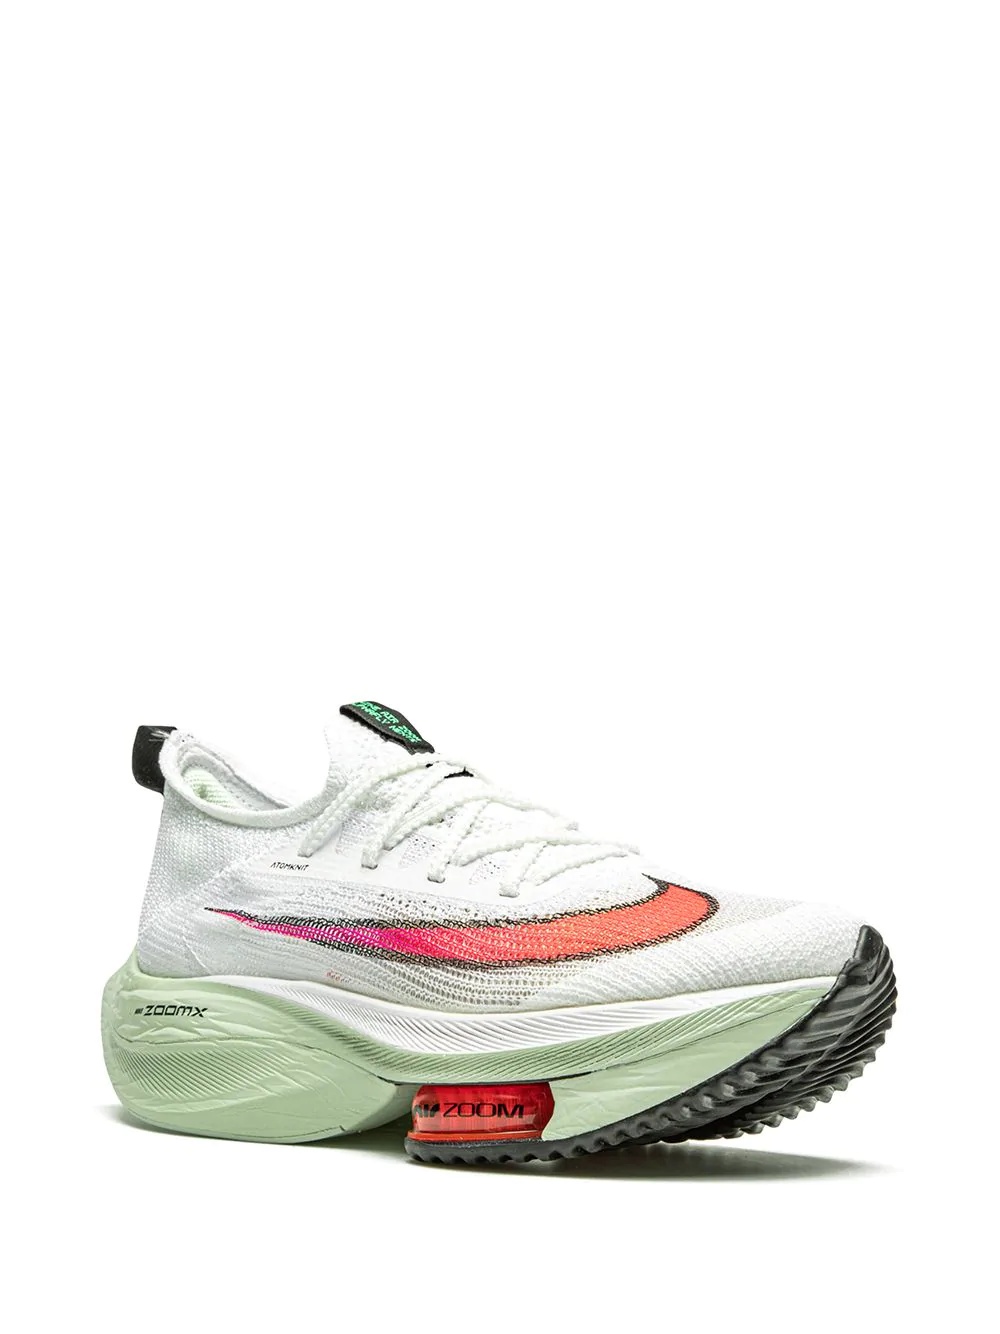 Air Zoom Alphafly Next% "Watermelon" sneakers - 2